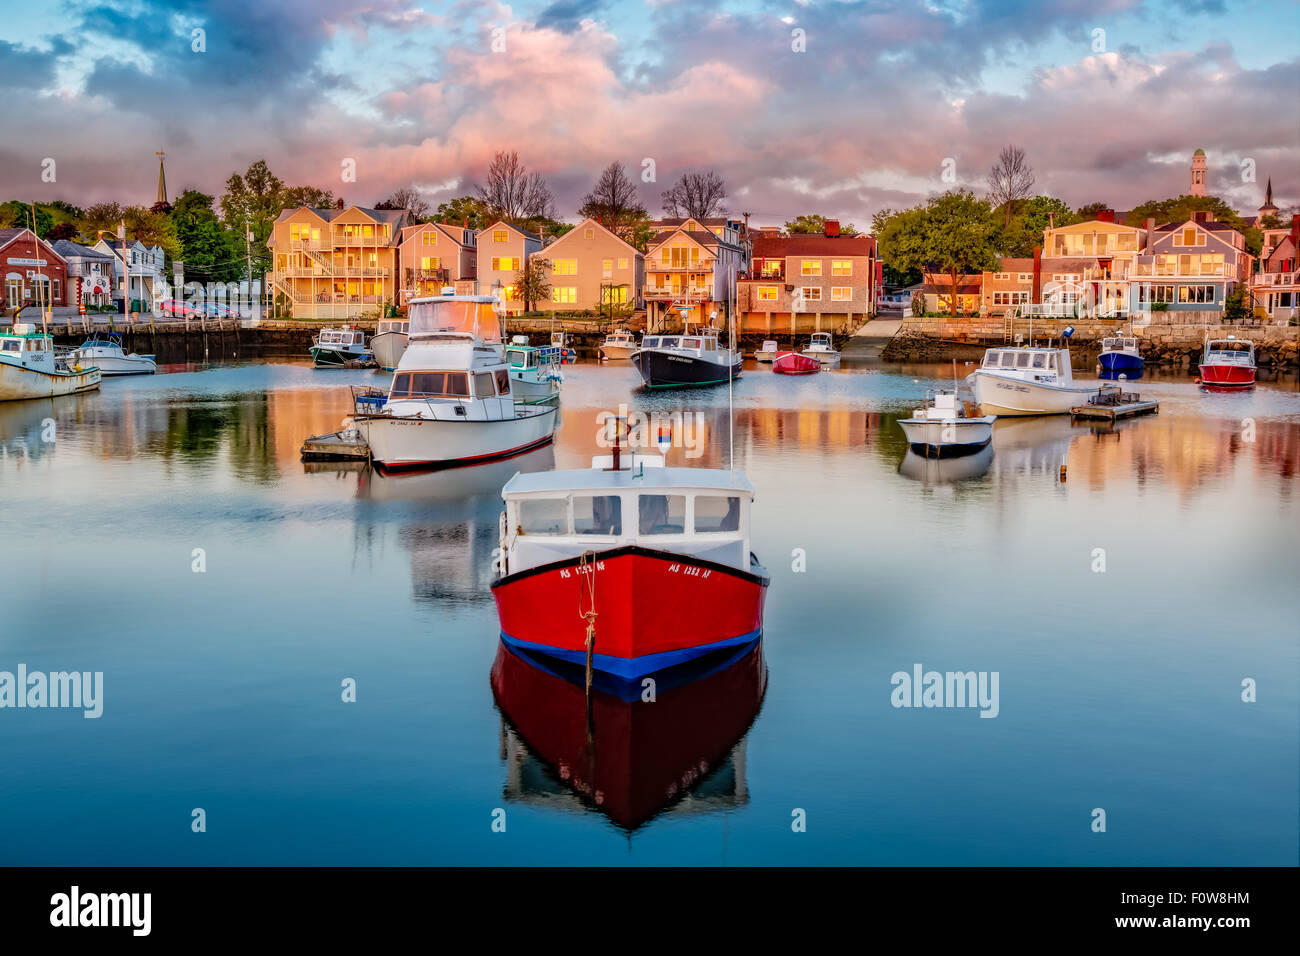 Rockport Harbor - Colorful fishing and pleasure boats docked at Bradley Wharf during first light at Rockport, Massachusetts. Stock Photo